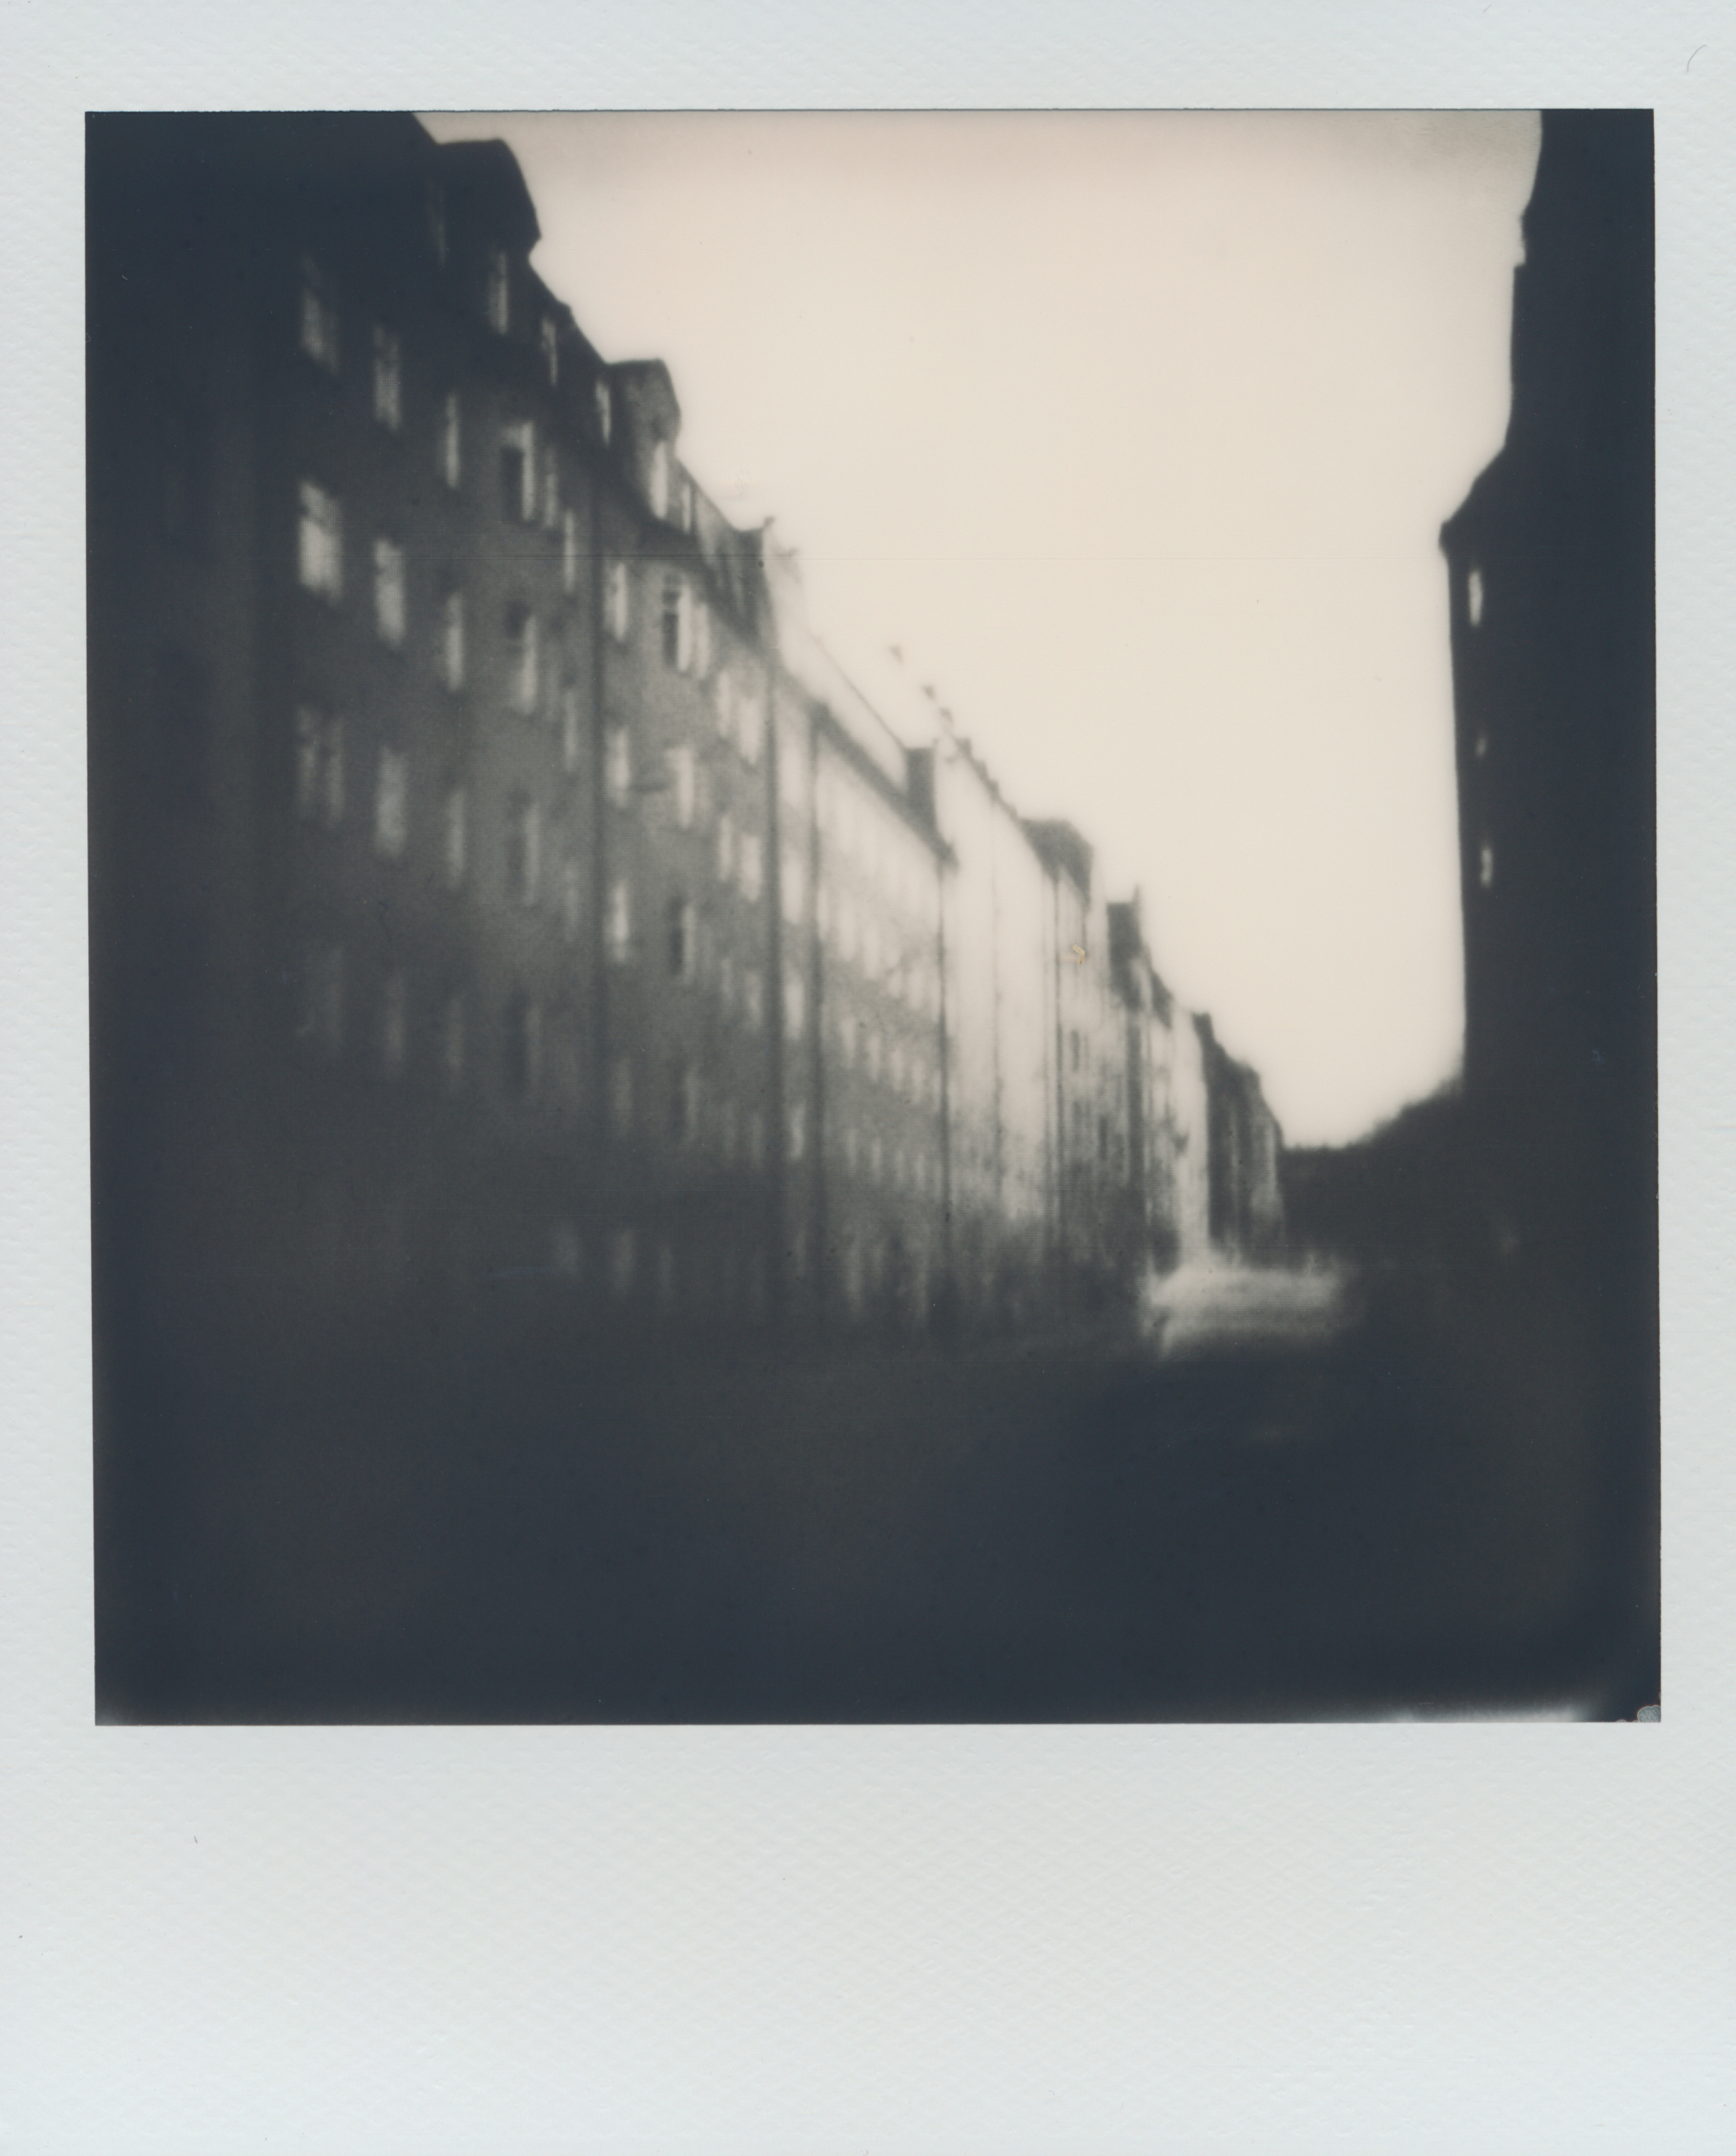 Stockholm Street | Impossible Project Instant Lab | Impossible Project 600 B/W Film | Per Forsström